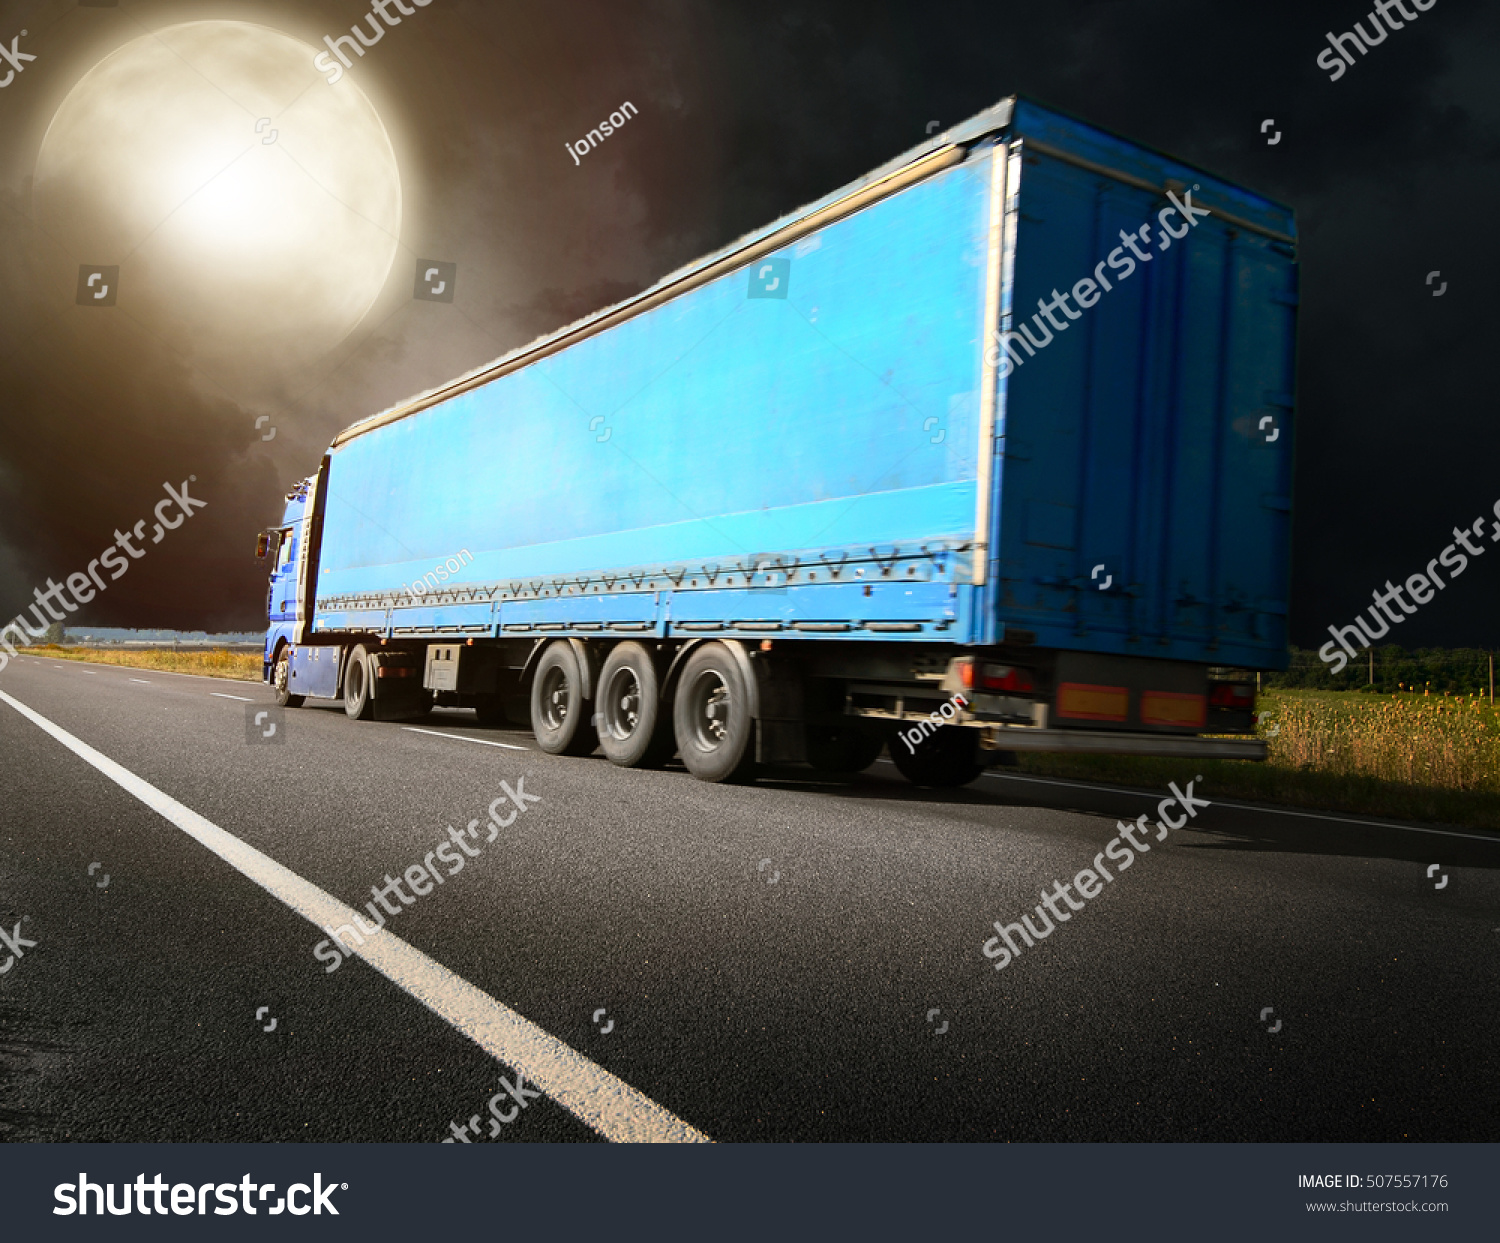 The truck driving towards sunset #507557176